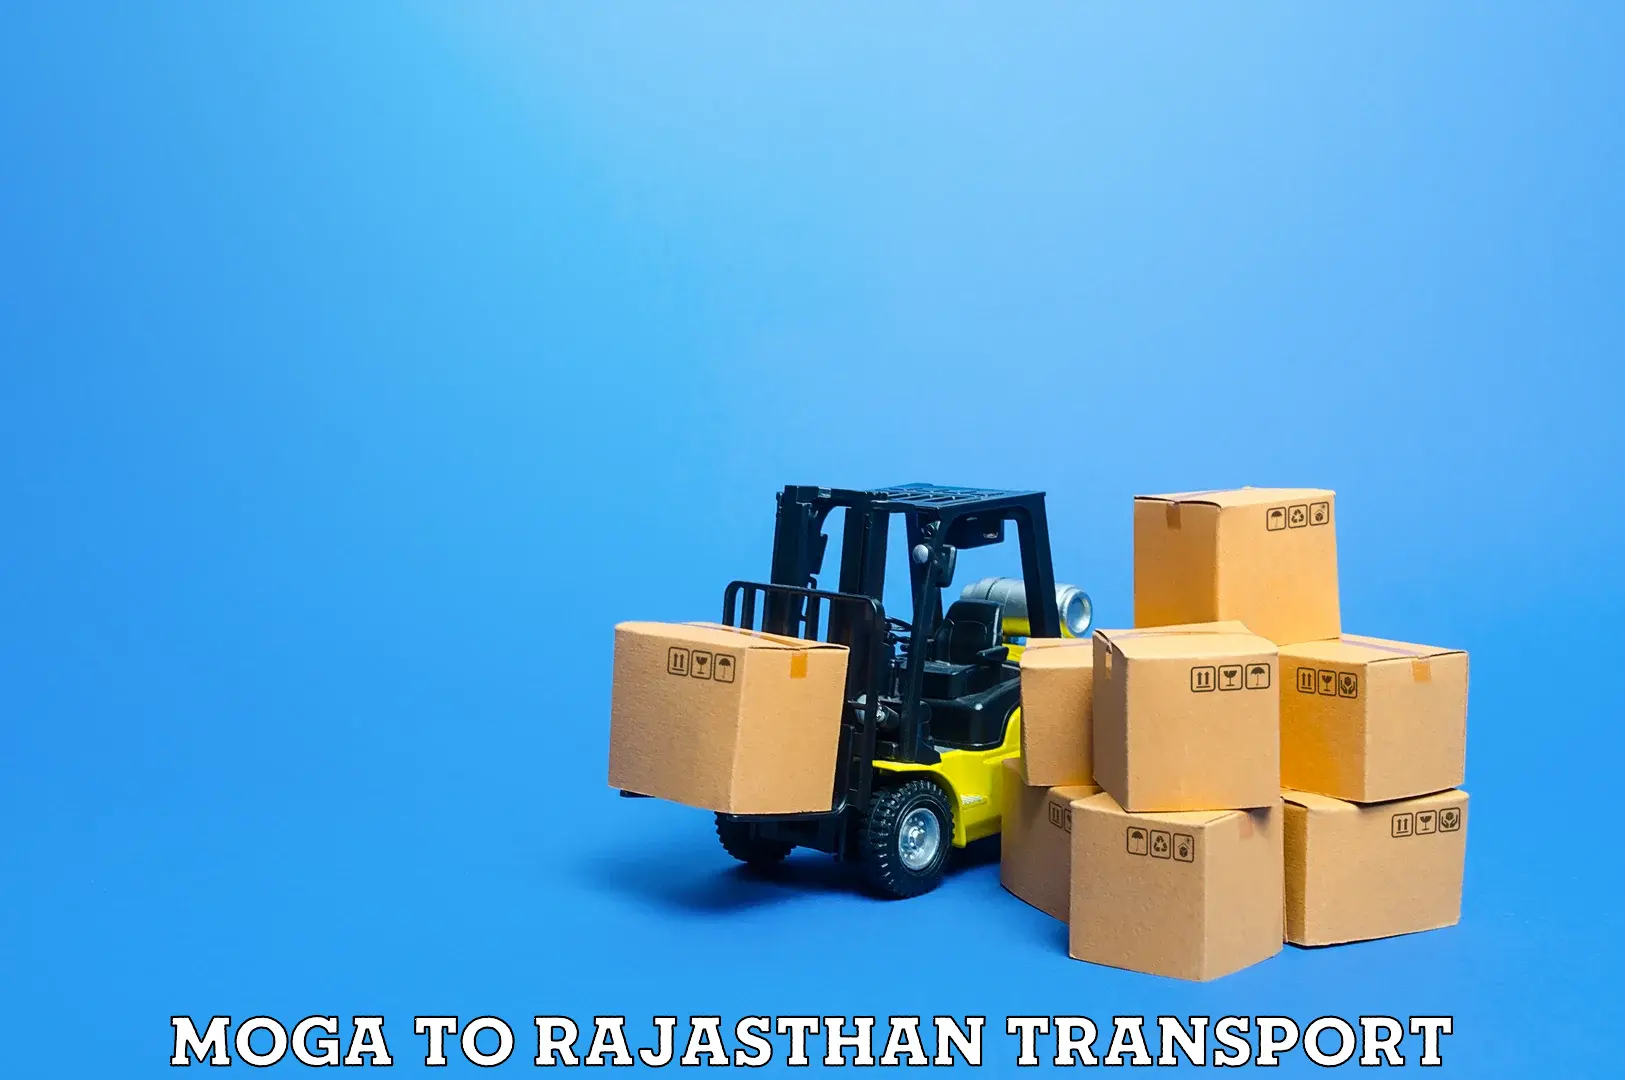 Truck transport companies in India Moga to Chaumahla